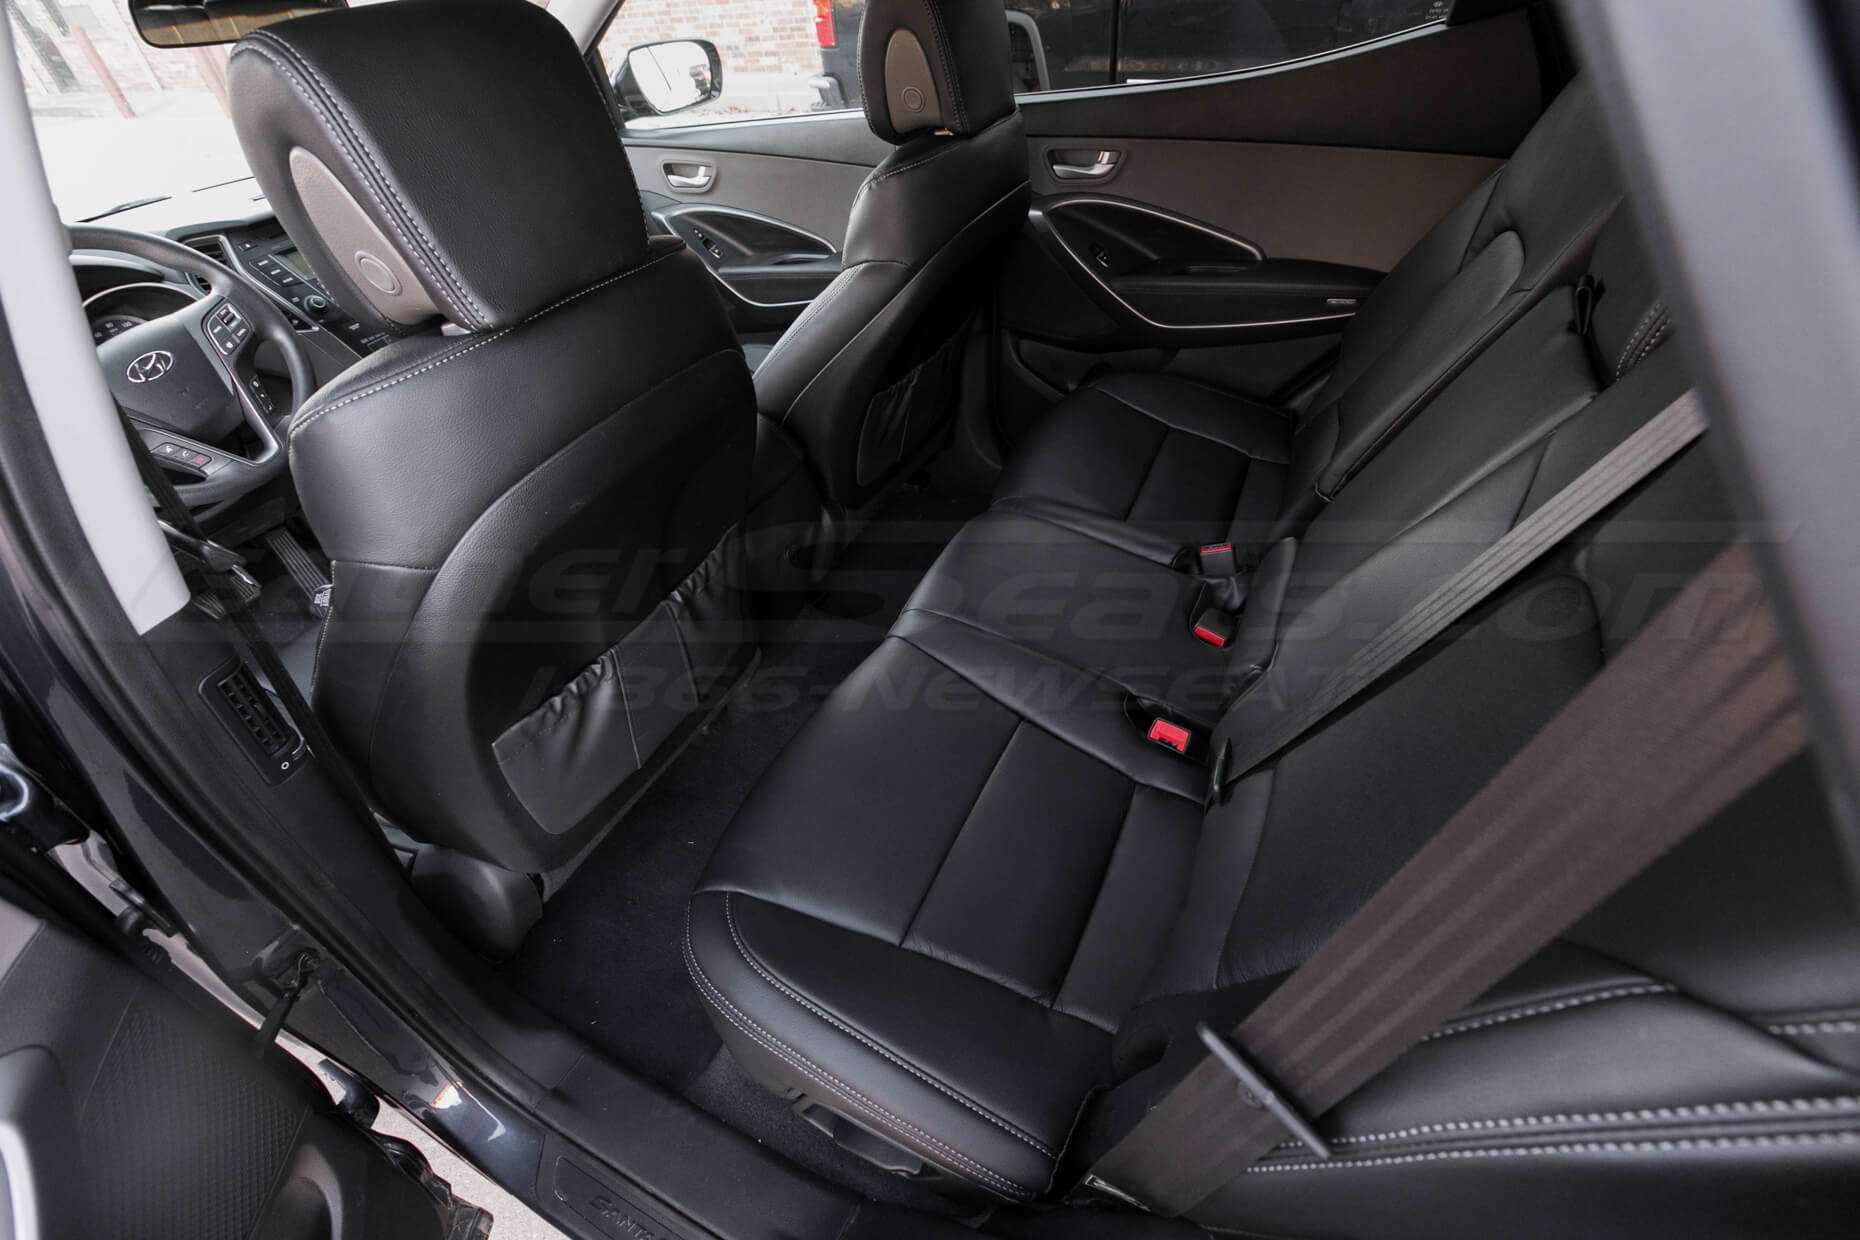 Hyundai Santa Fe Sport installed leather kit - Black - Rear seats with back of front seats